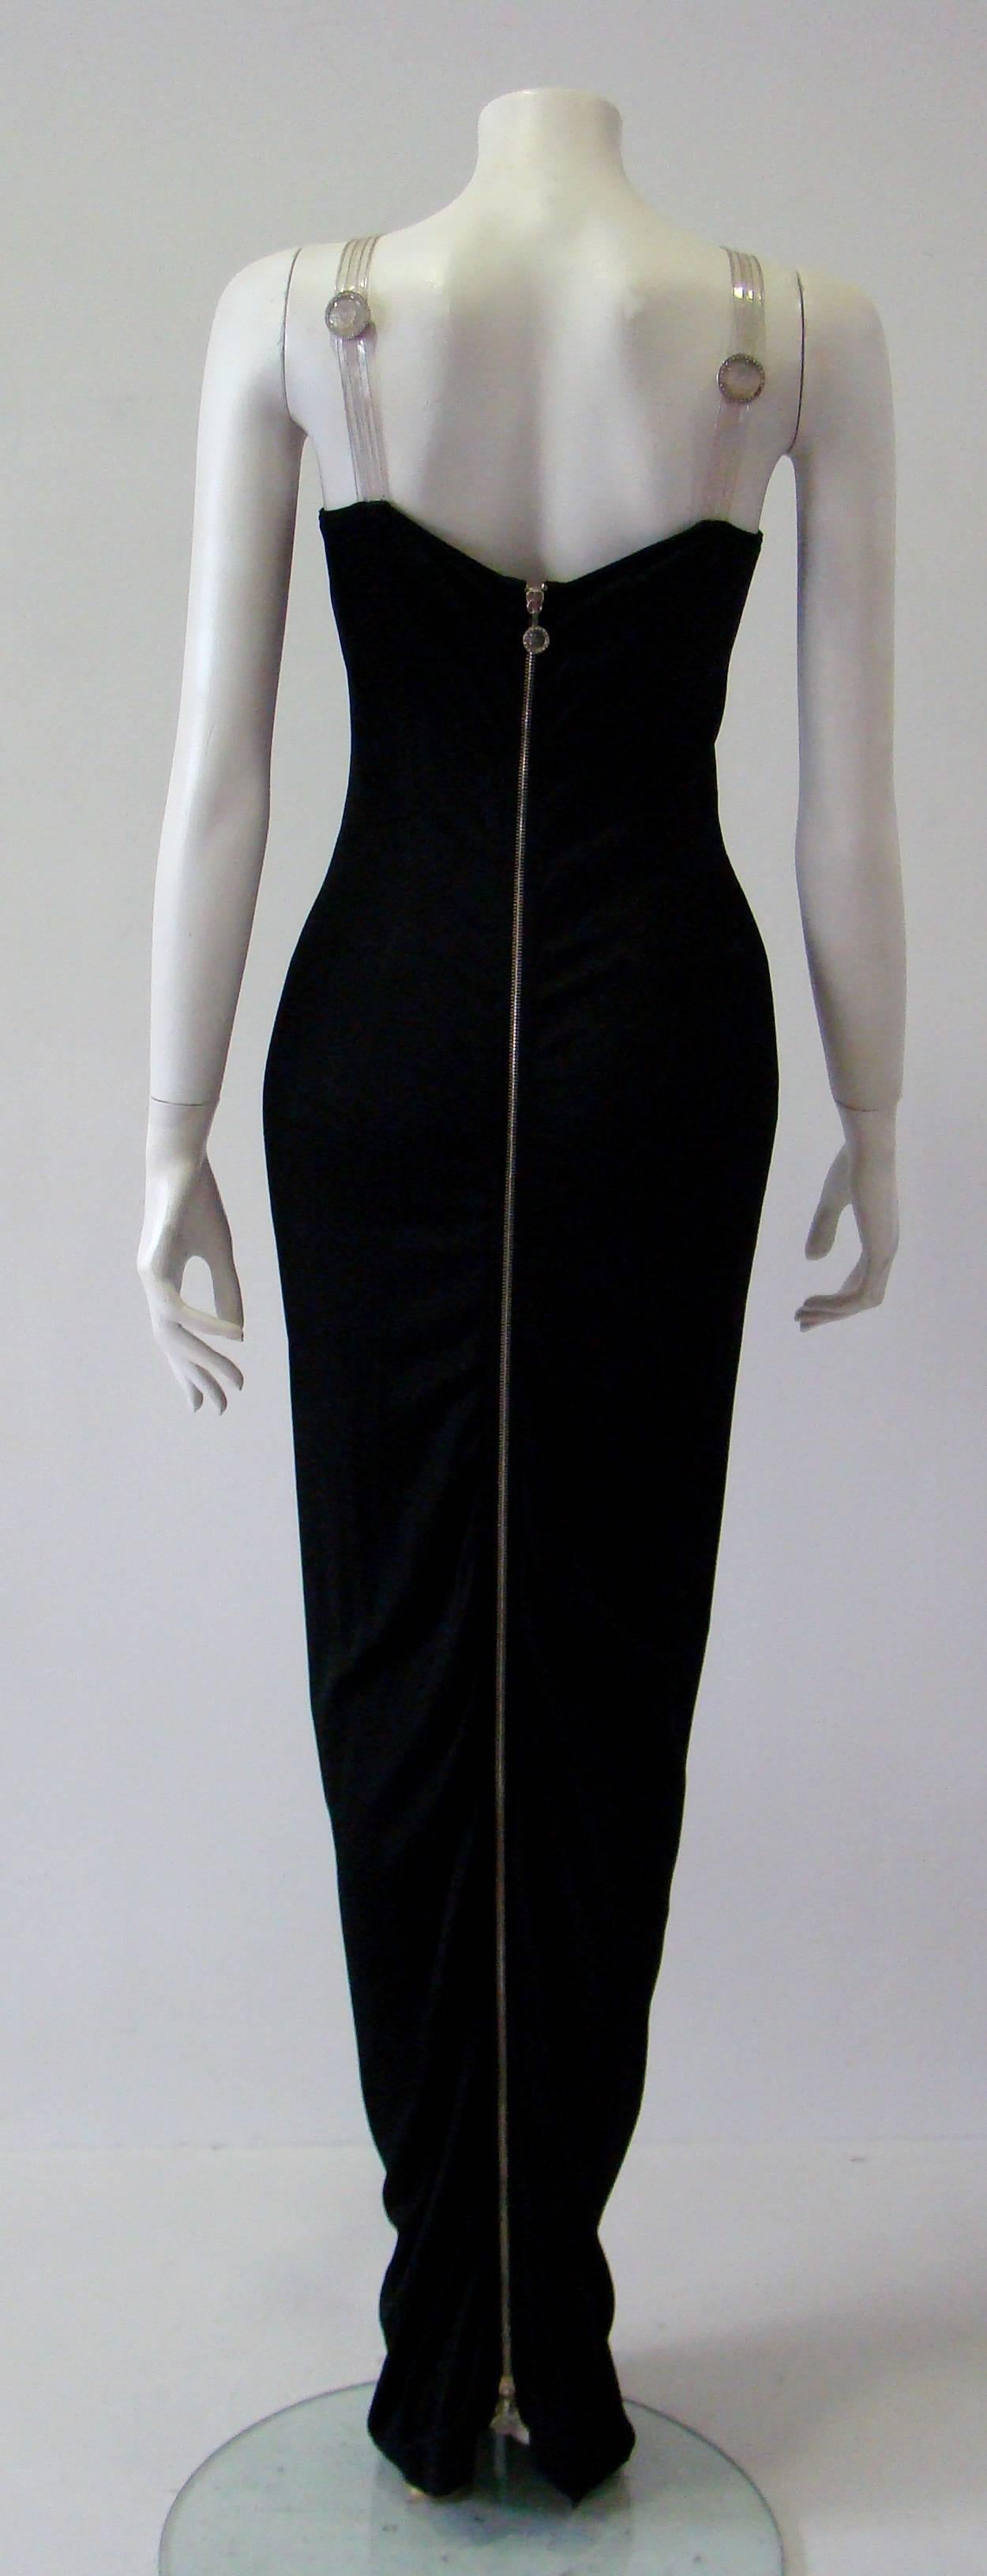 Women's Gianni Versace Versatile Bodycon Stretch Ruched Evening Dress For Sale